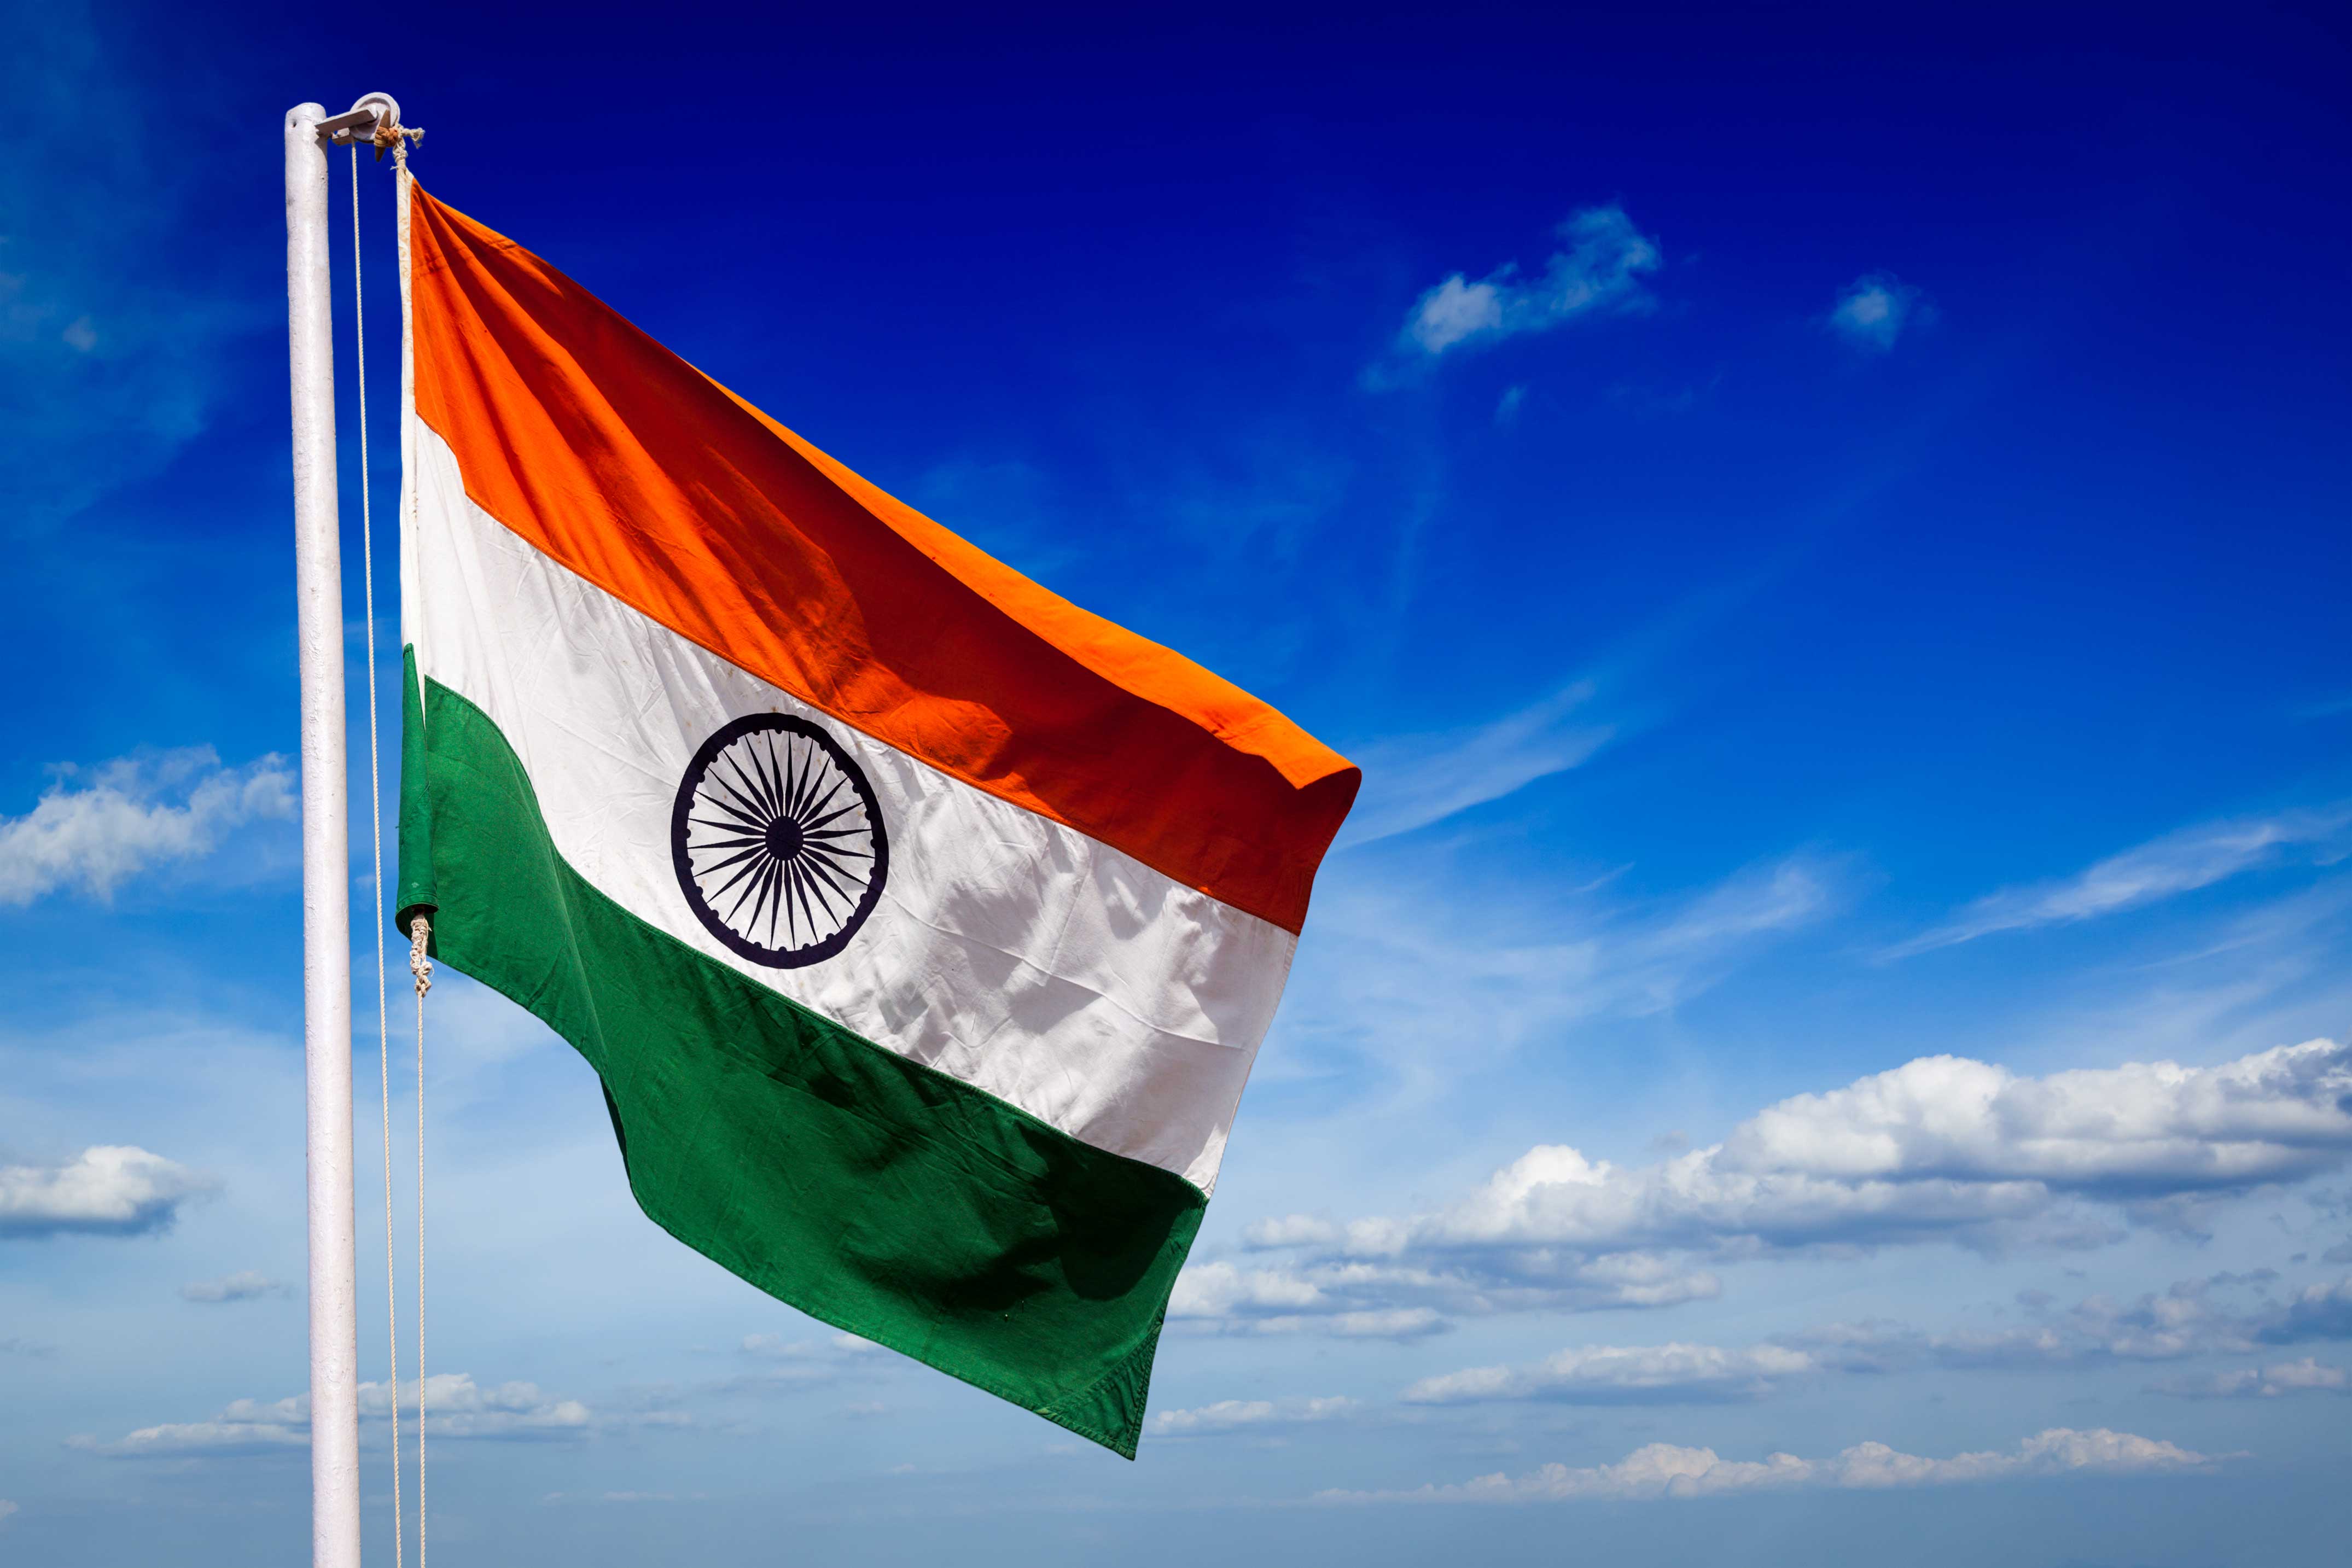 Indian Flag Wallpapers - HD Indian Flag Images 2022 [Free Download]